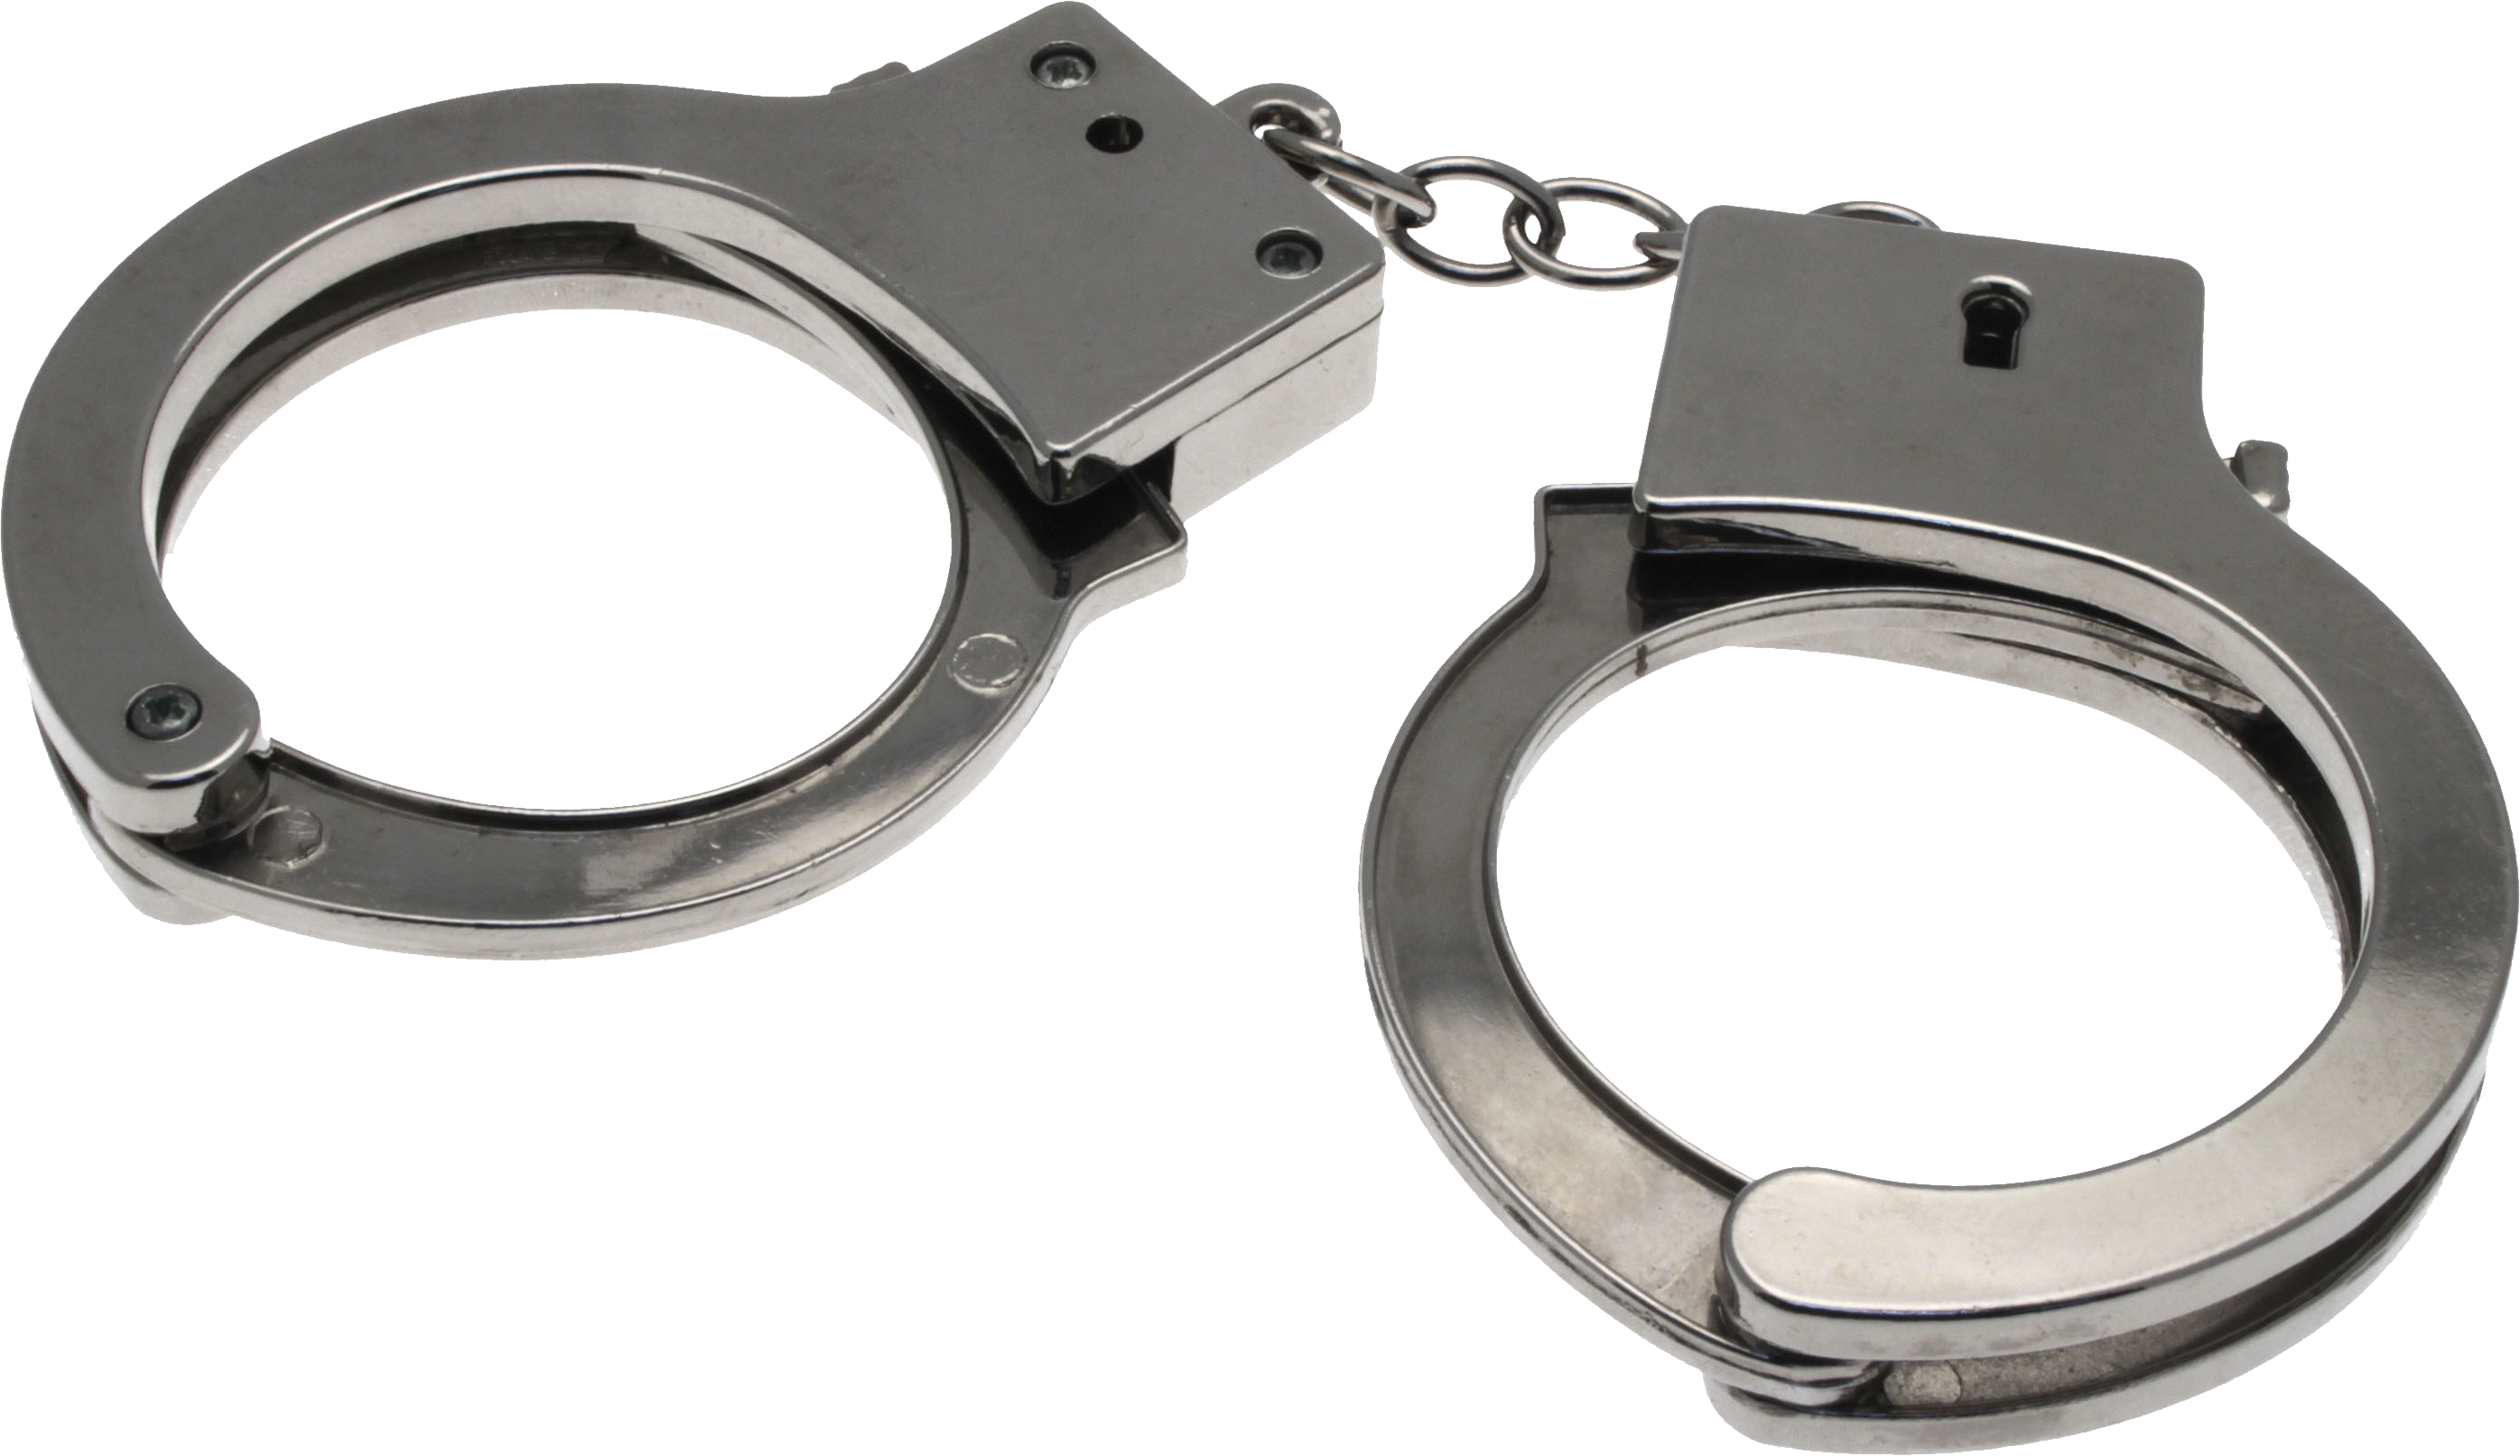 Png image purepng free. Handcuffs clipart accessory